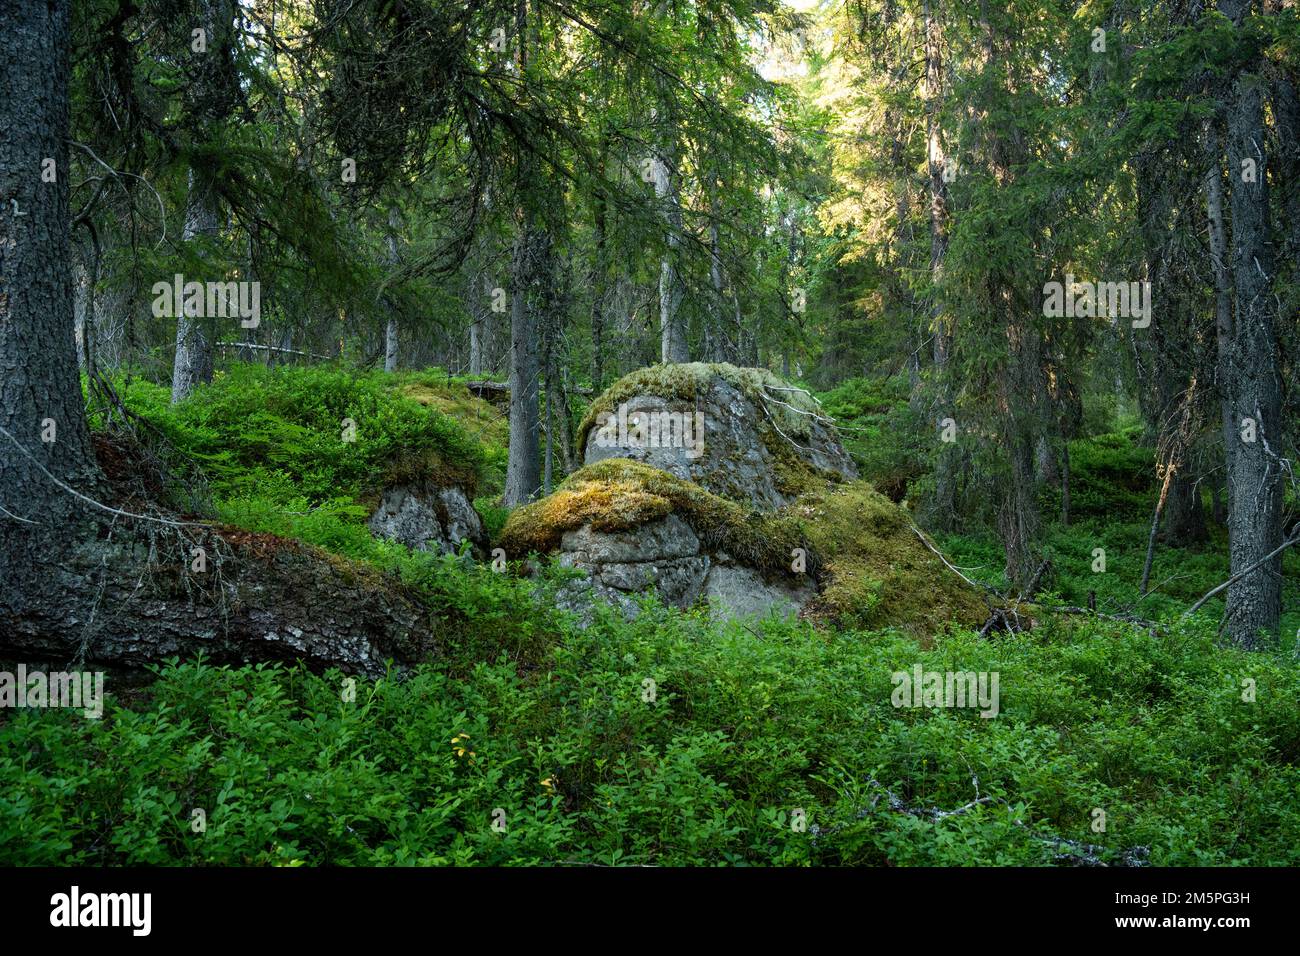 A summery and lush old-growth forest scenery with a large boulder in Närängänvaara near Kuusamo, Northern Finland Stock Photo